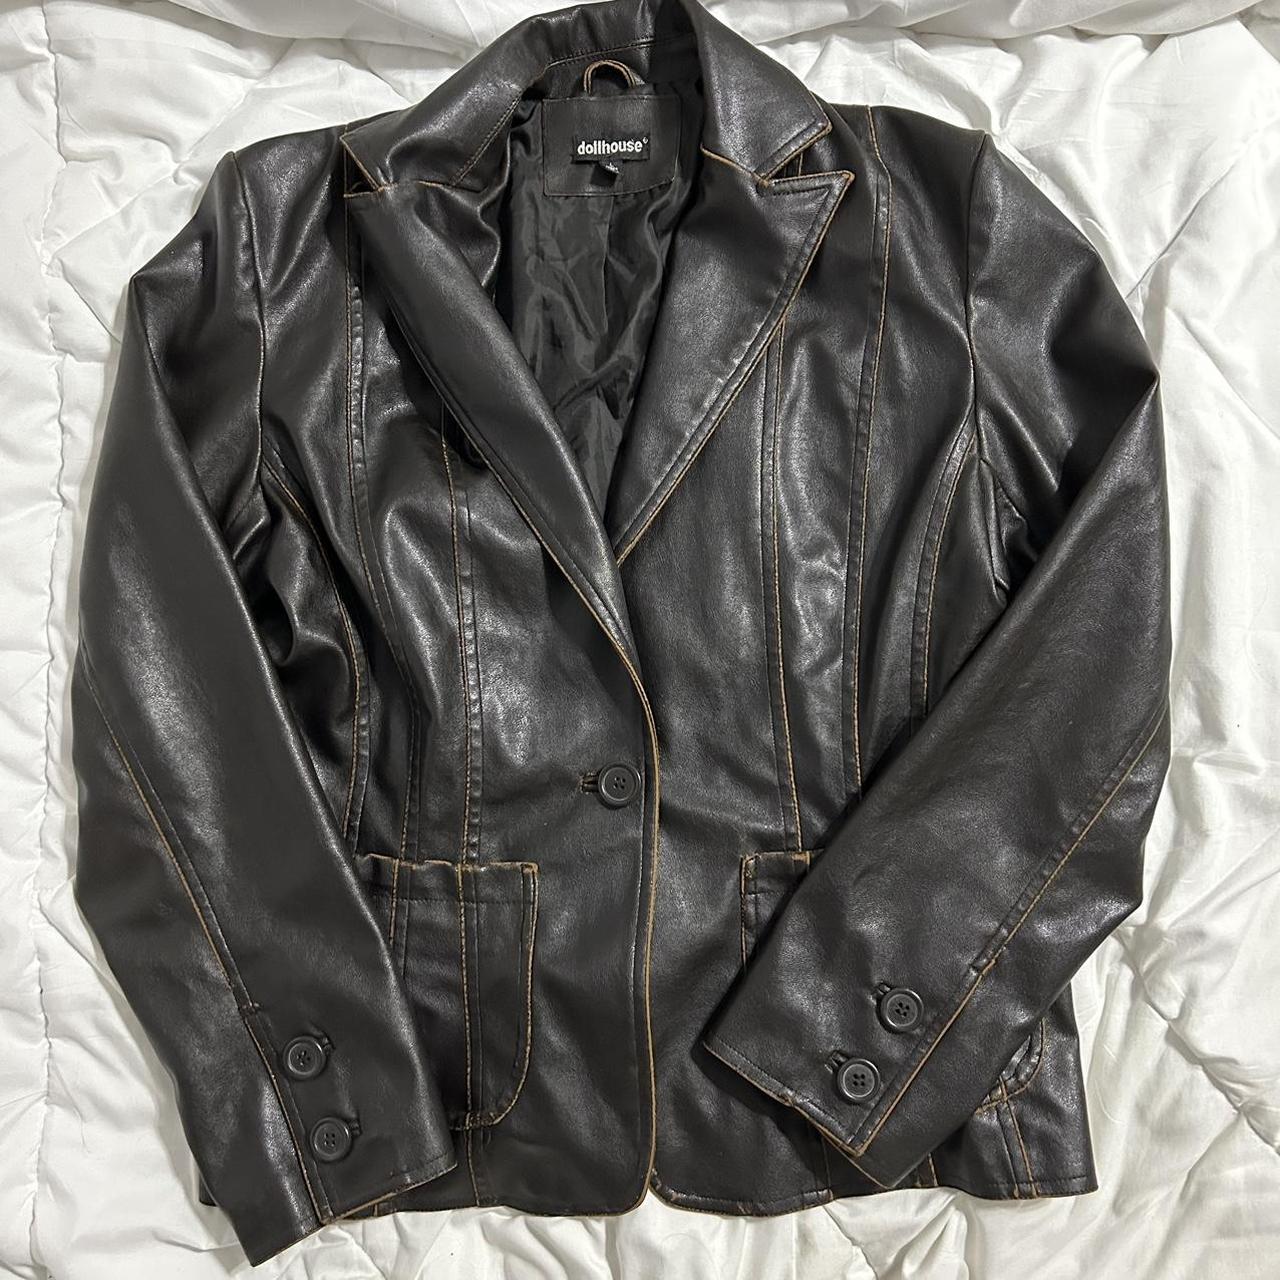 dollhouse leather jacket 🖤 not sure if this is real... - Depop